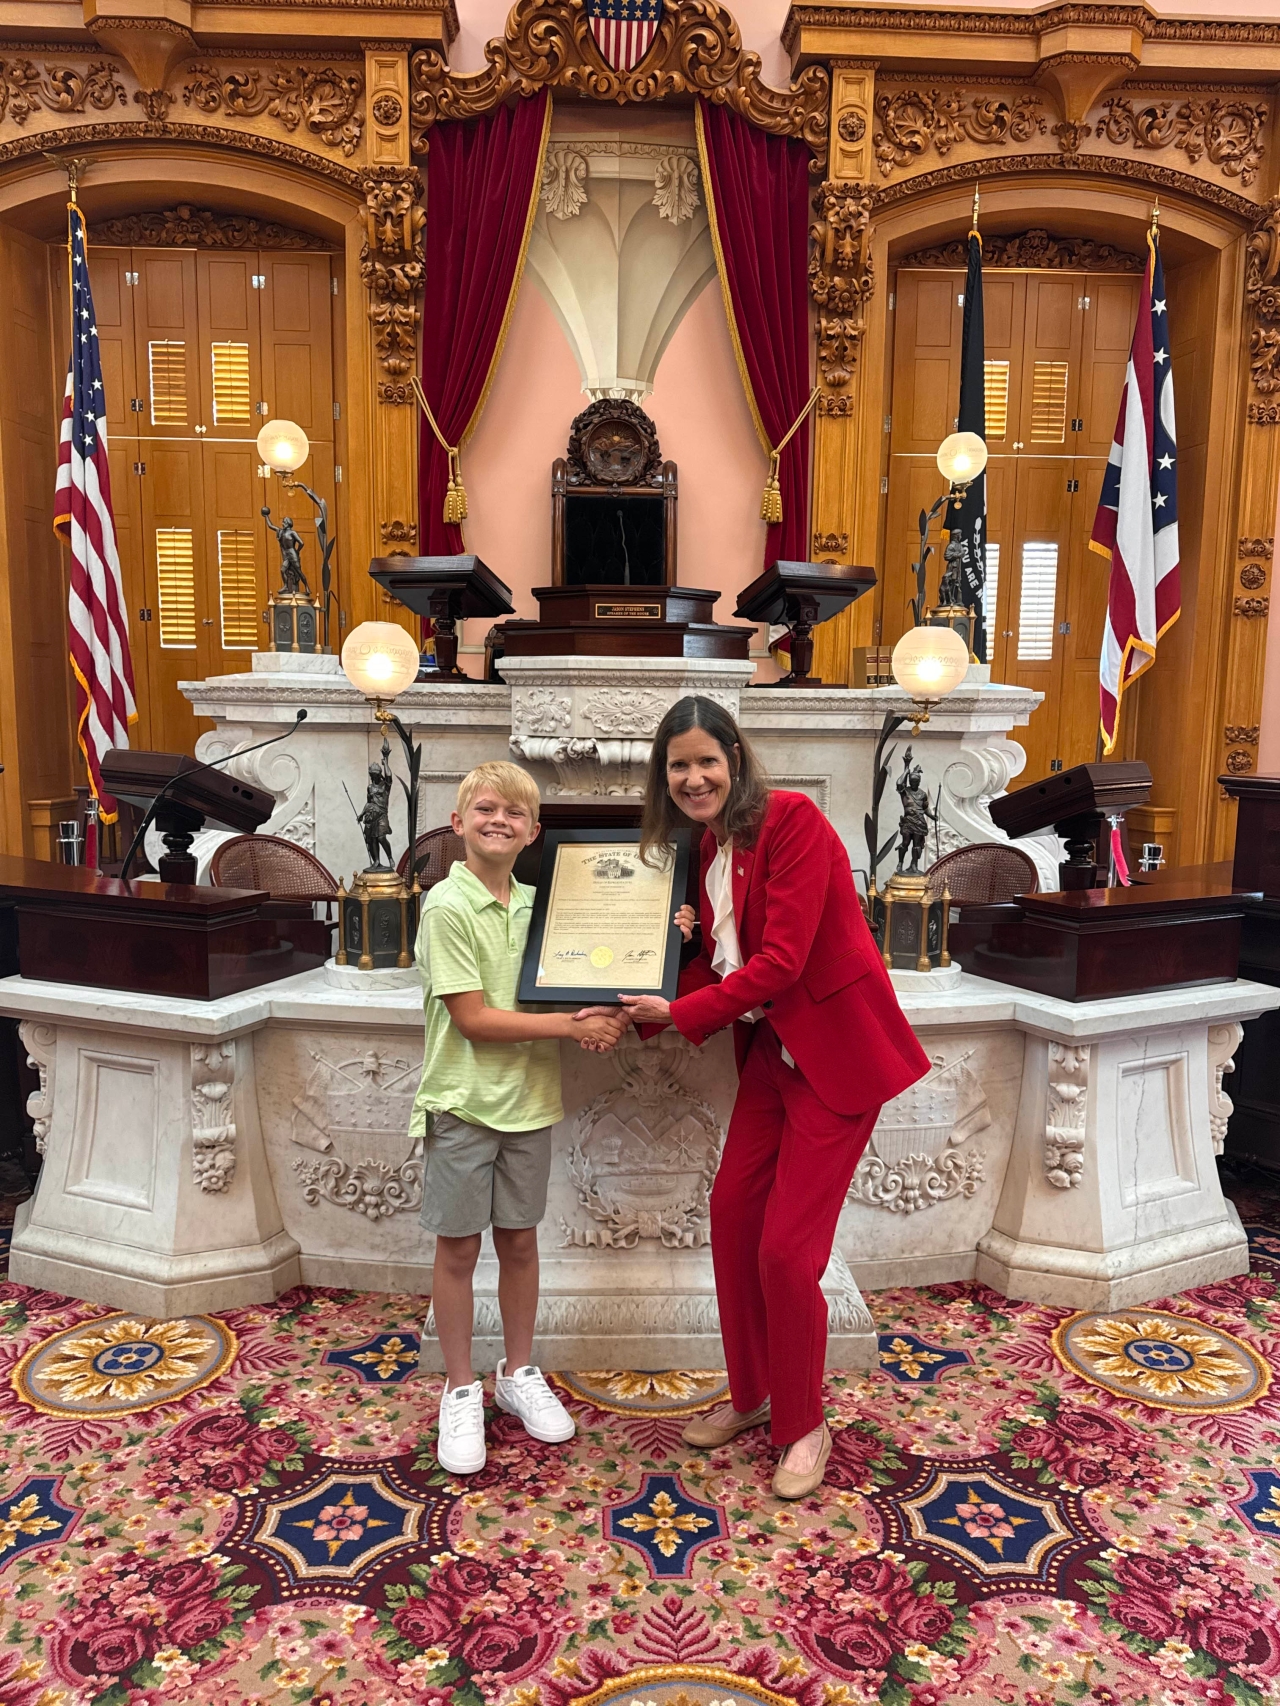 Representative Richardson invited Dane Flynn and his family to the Ohio Statehouse to commend his win of the Lego Ohio Mini Master Builder title.